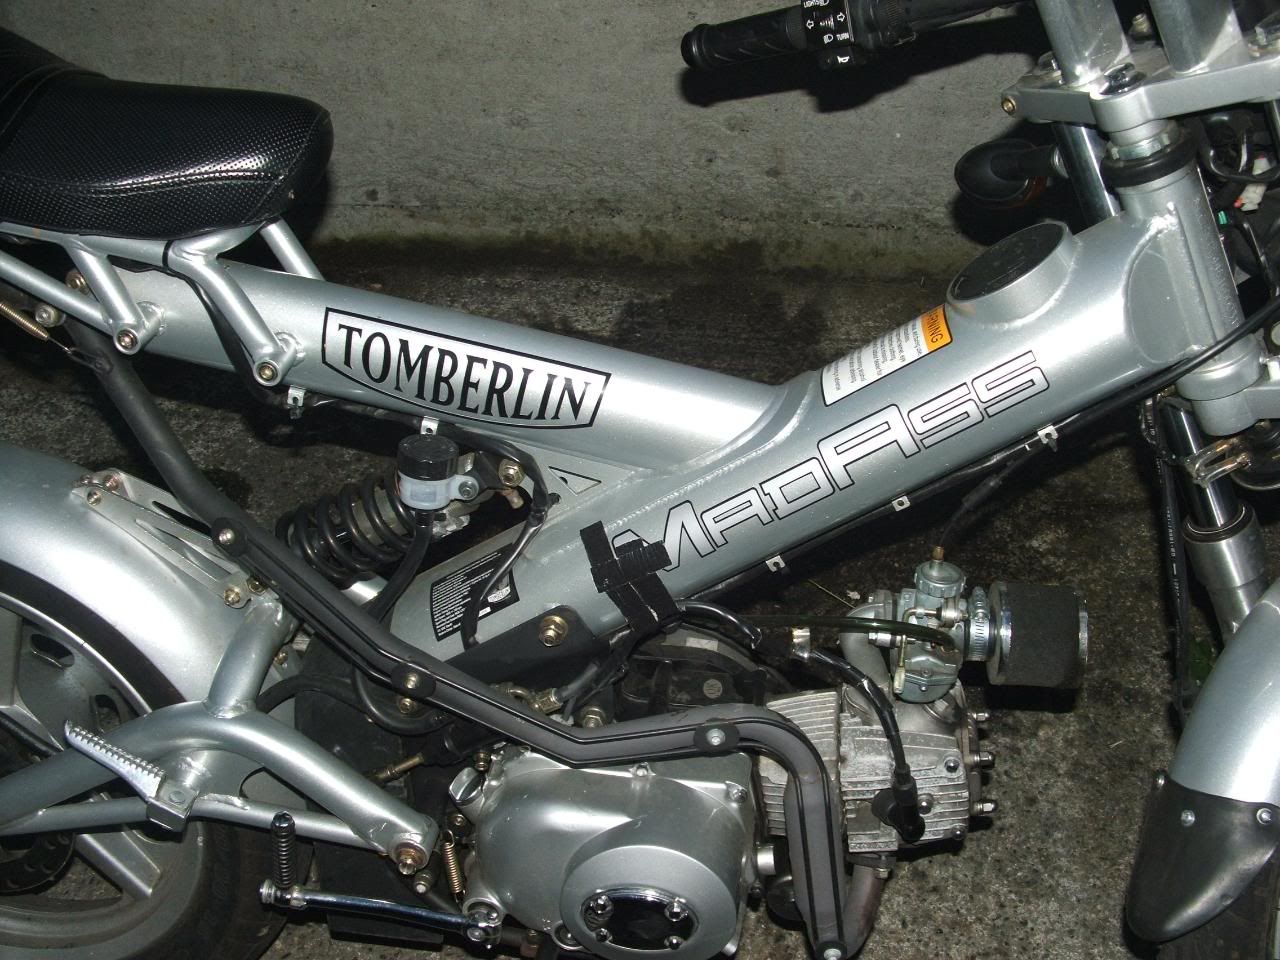 http://www.motorcycle.com/specs/tomberlin/scooter/2007/madass/scooter.html